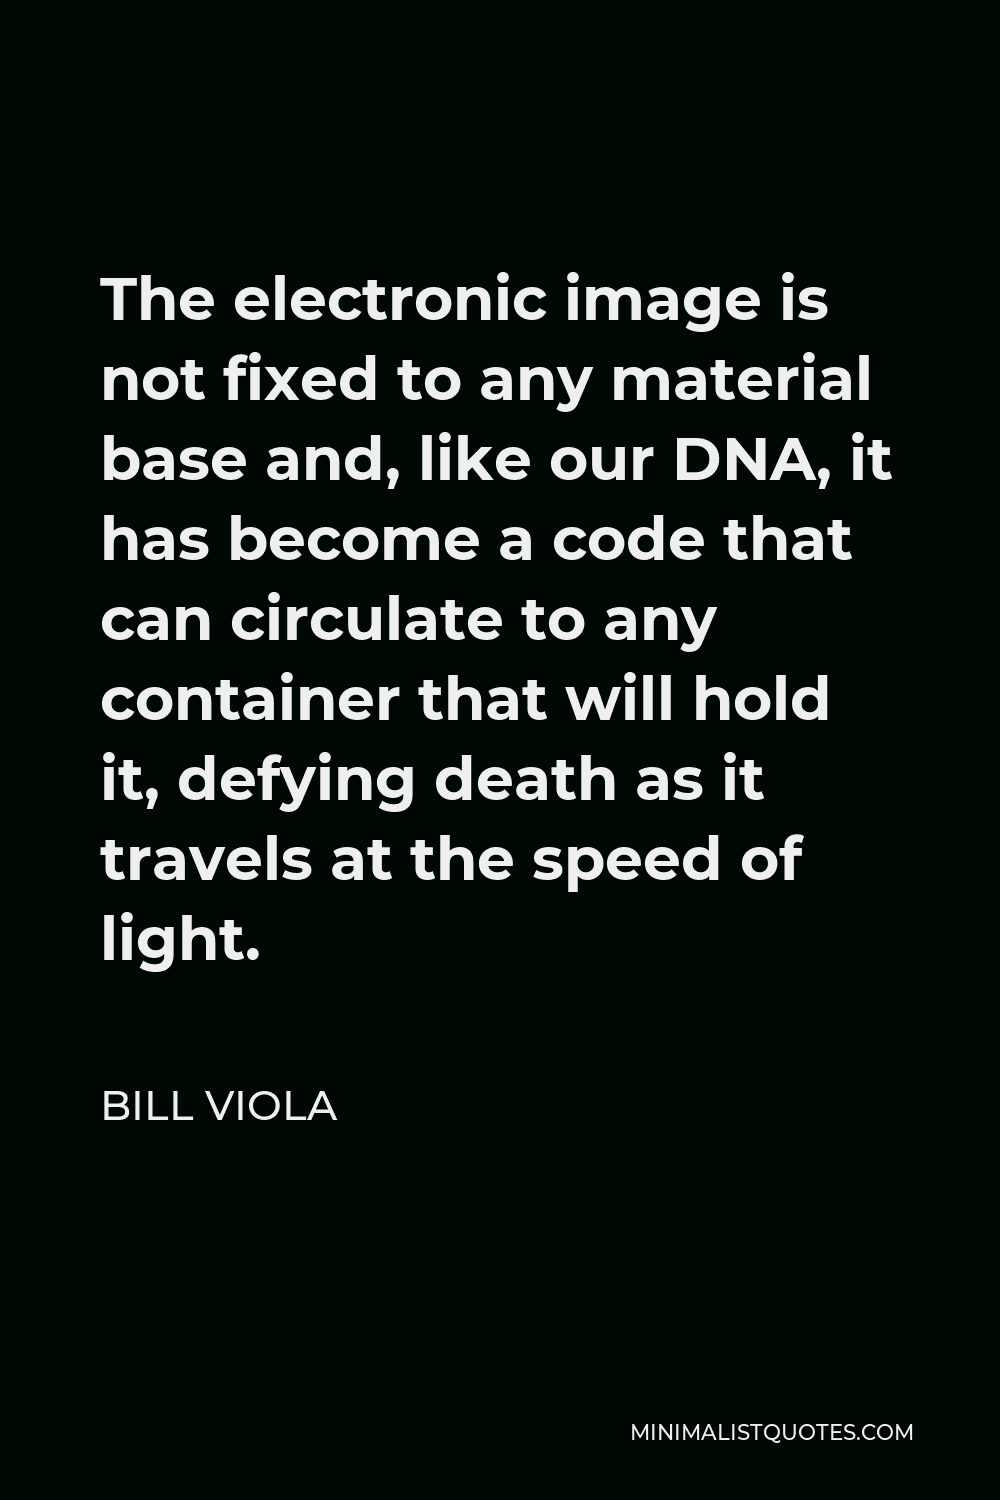 Bill Viola Quote - The electronic image is not fixed to any material base and, like our DNA, it has become a code that can circulate to any container that will hold it, defying death as it travels at the speed of light.